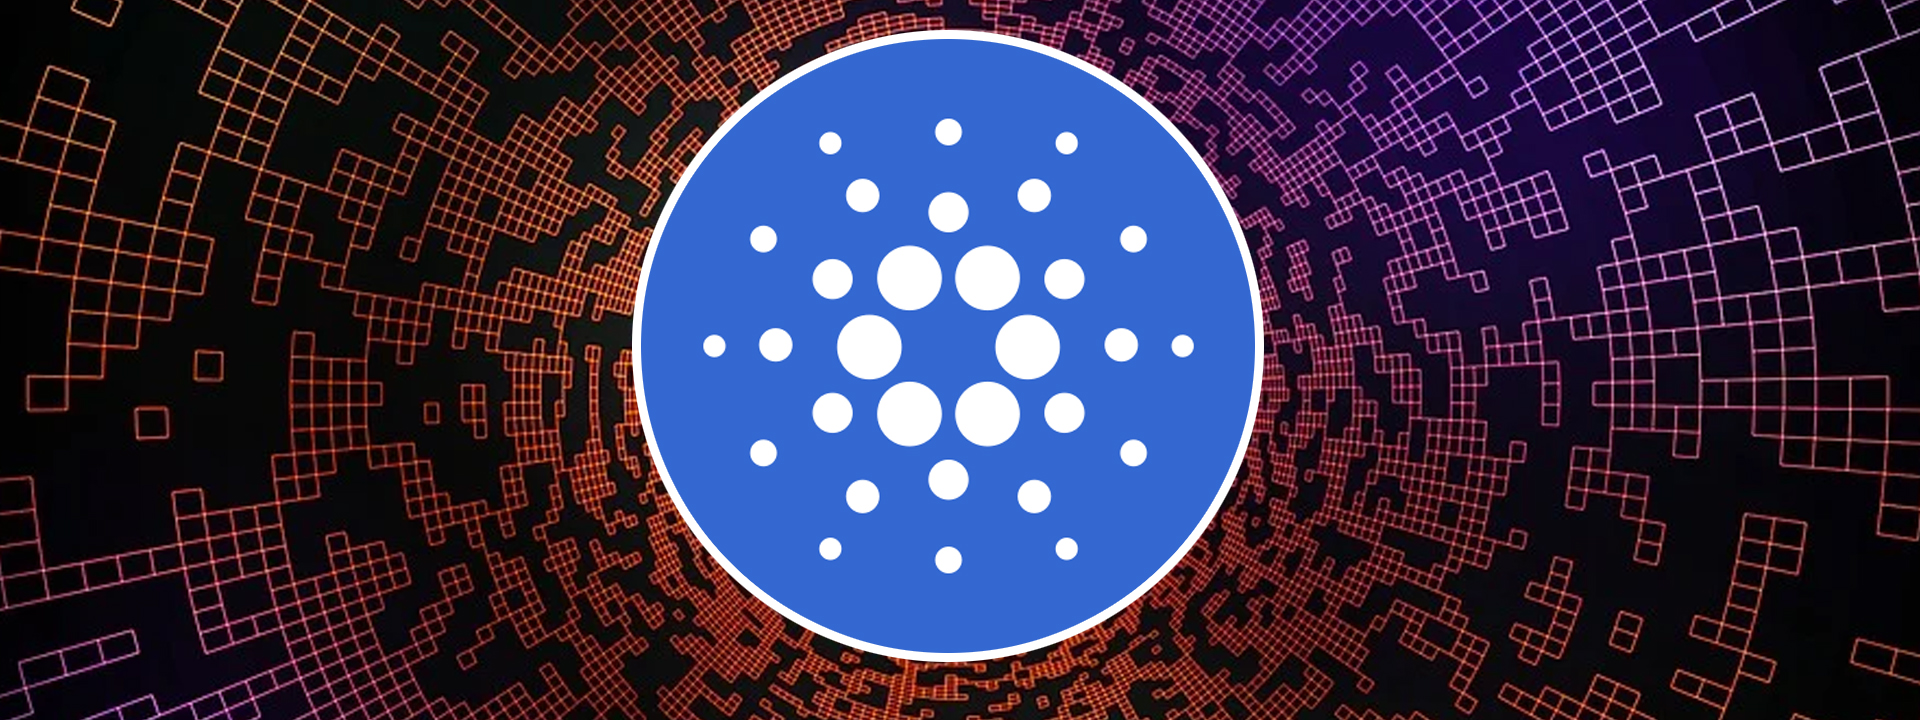 Cardano Price Analysis: ADA Appears to be in Recovery, but it is still in The Parallel Channel